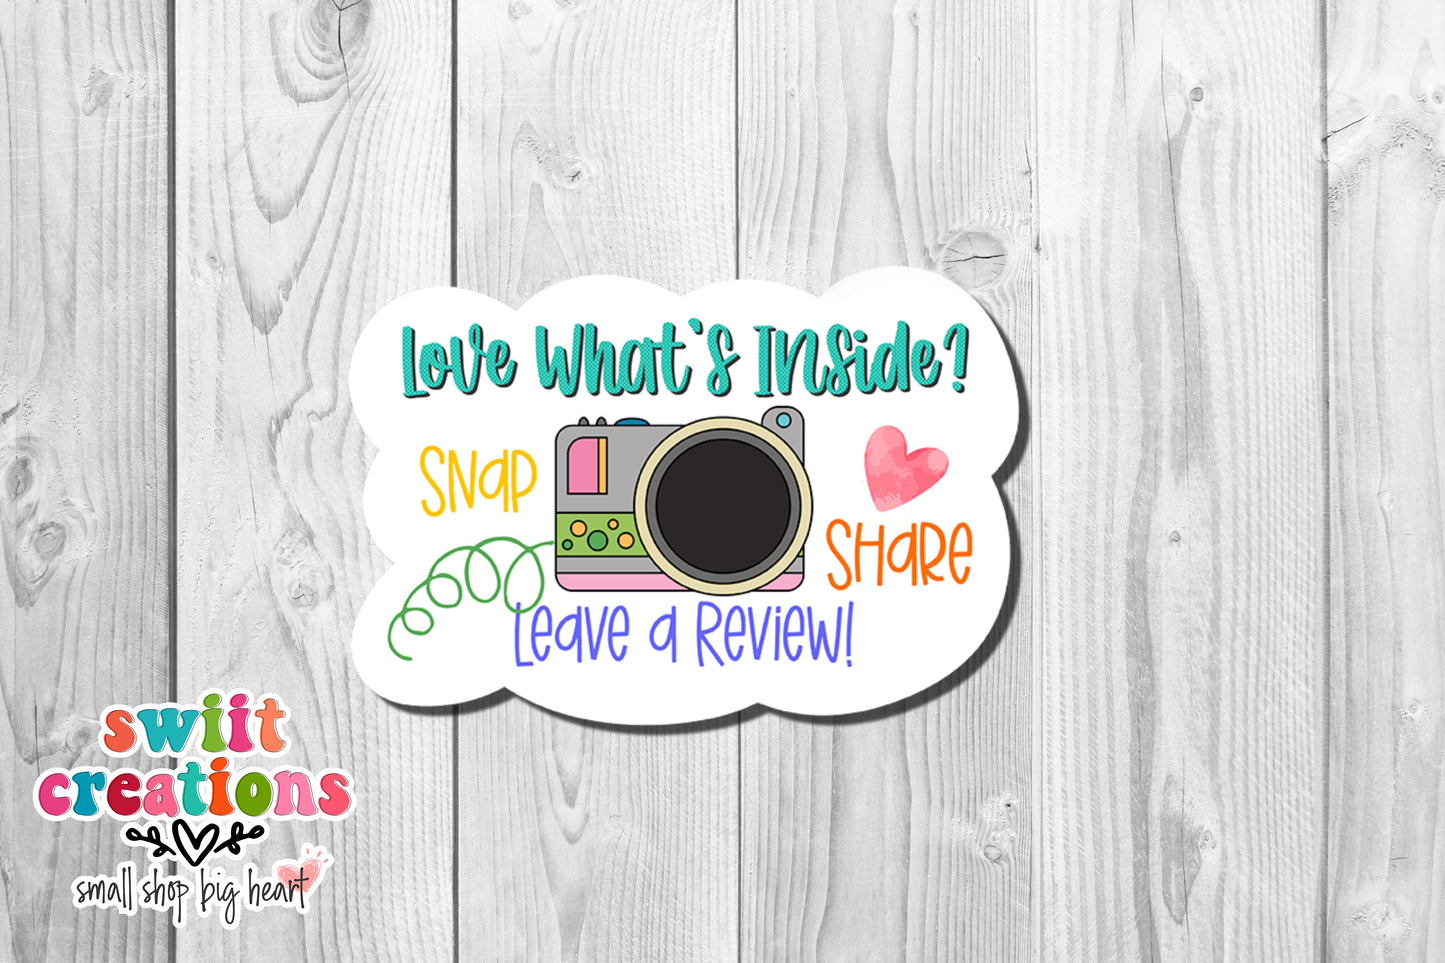 Love What's Inside? Snap Share Review Sticker (SB30)